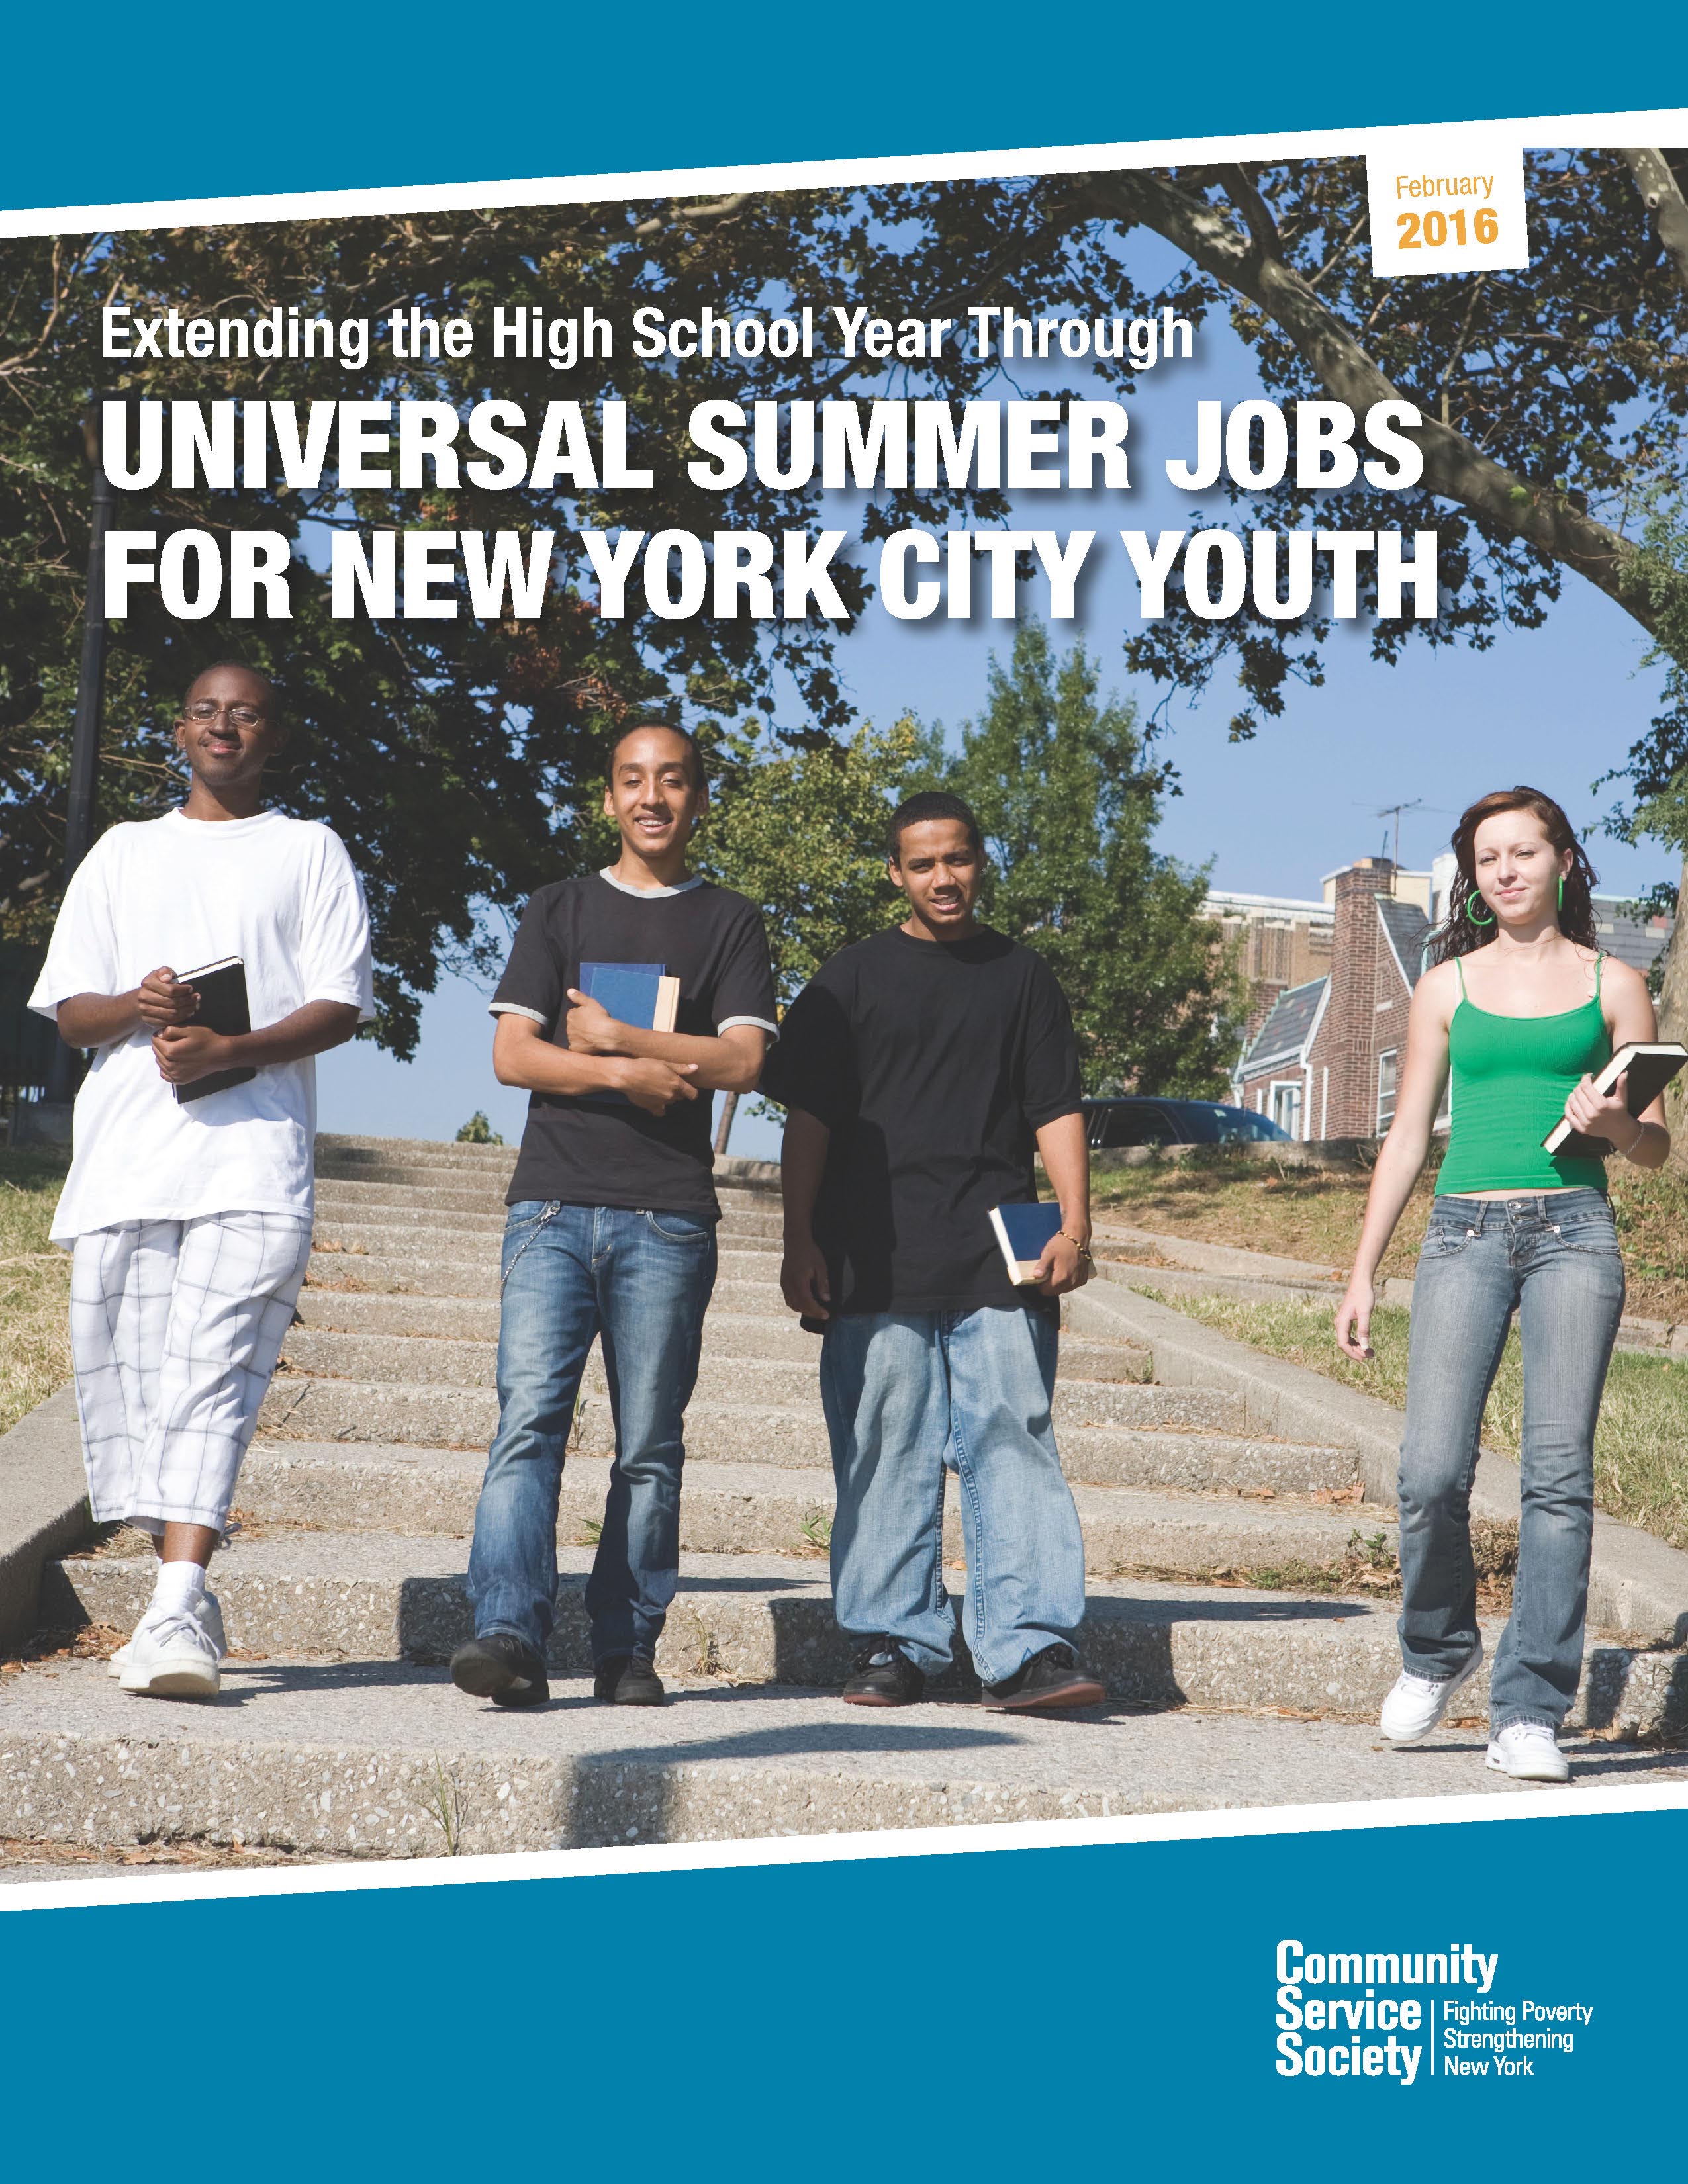 Extending the High School Year Through Universal Summer Jobs For New York City Youth